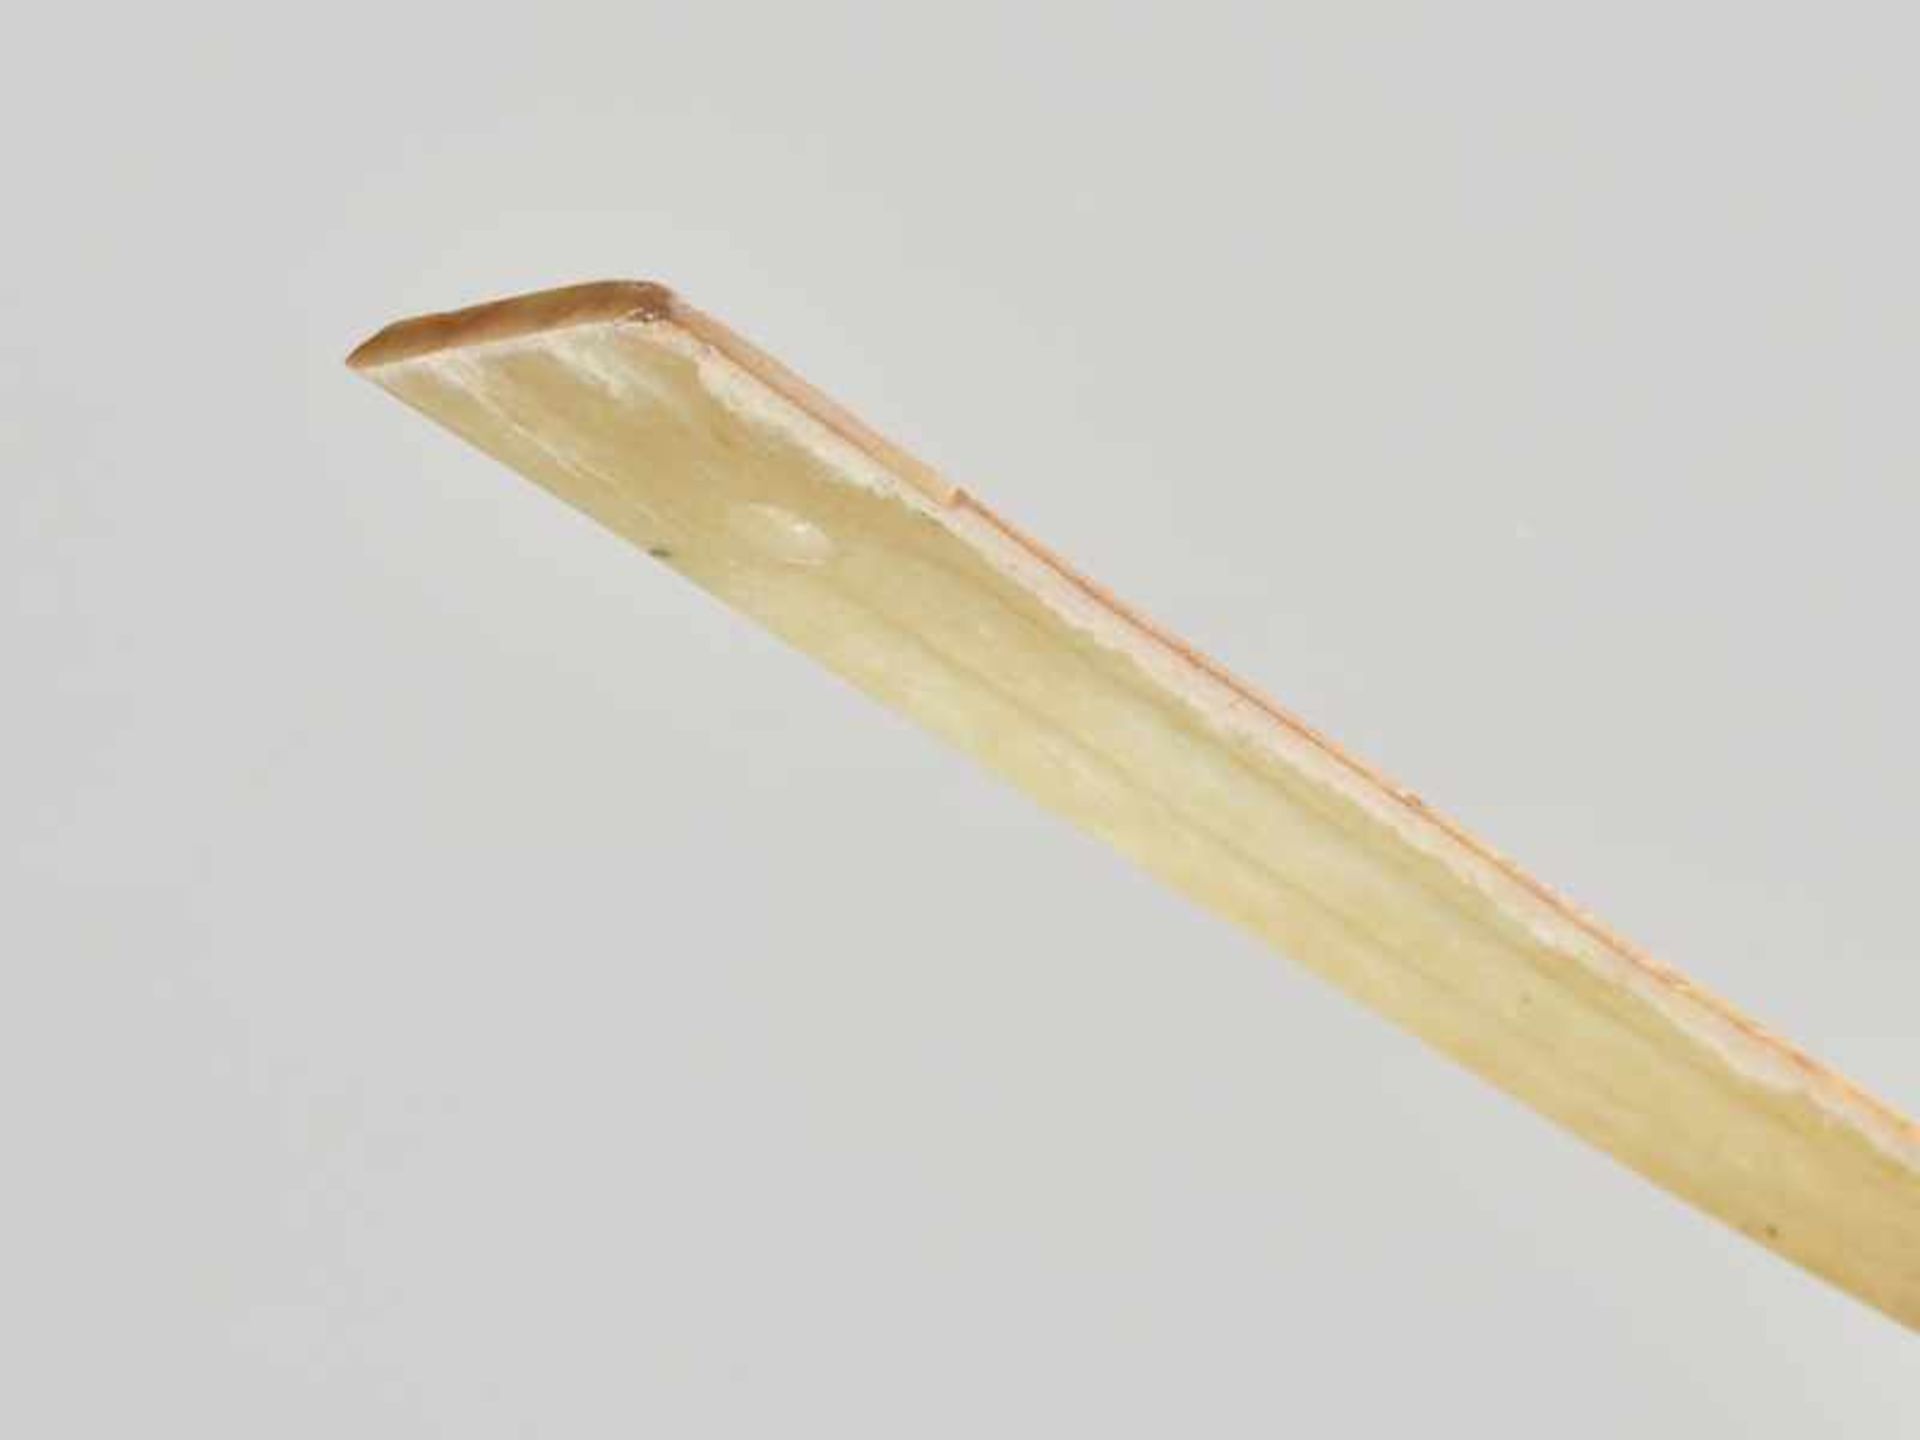 A FINELY CARVED SMALL GE DAGGER-AXE IN YELLOWISH JADE WITH DELICATE GROOVES Jade. China, Late Shang, - Image 5 of 7